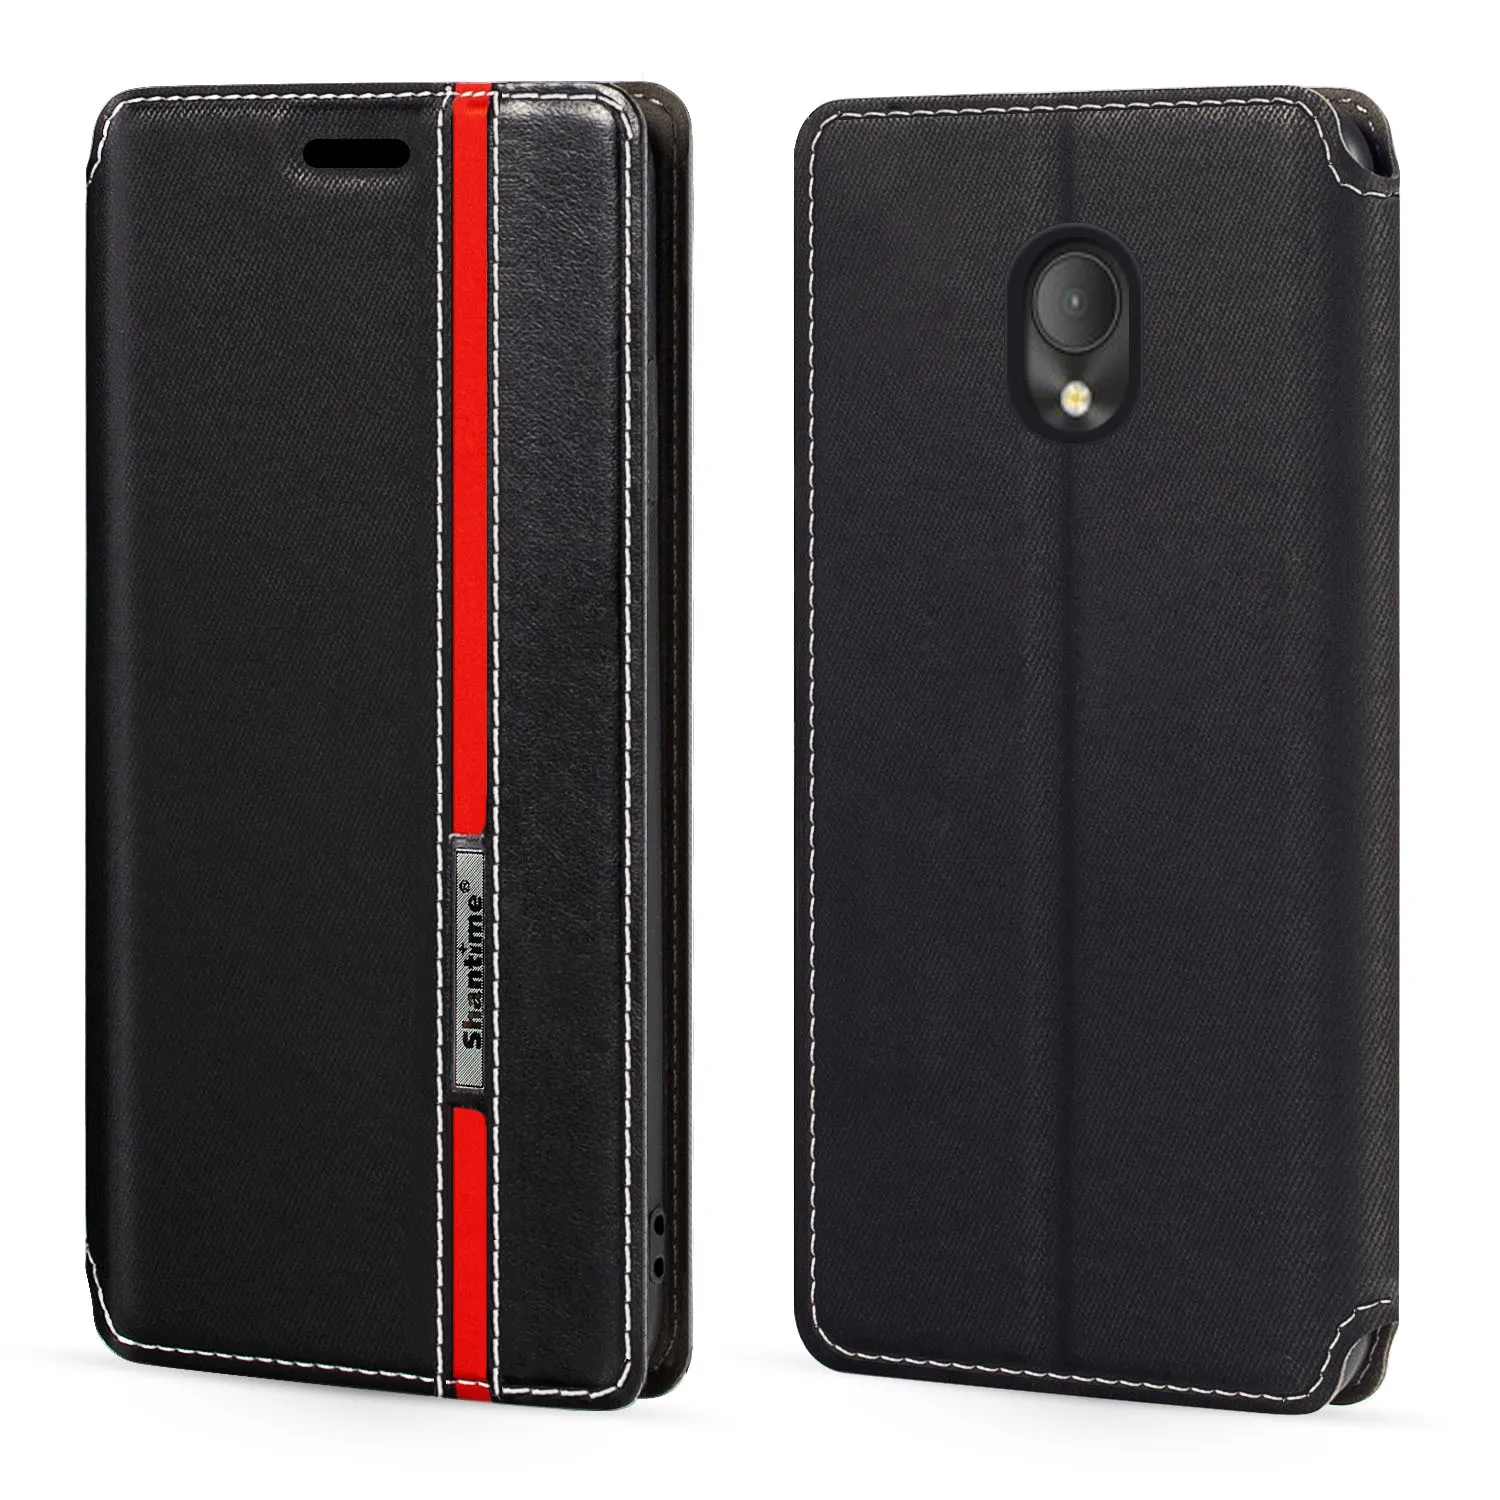 

For Alcatel U5 3G 4047 4047D Case Fashion Multicolor Magnetic Closure Leather Flip Case Cover with Card Holder 5.0 inches